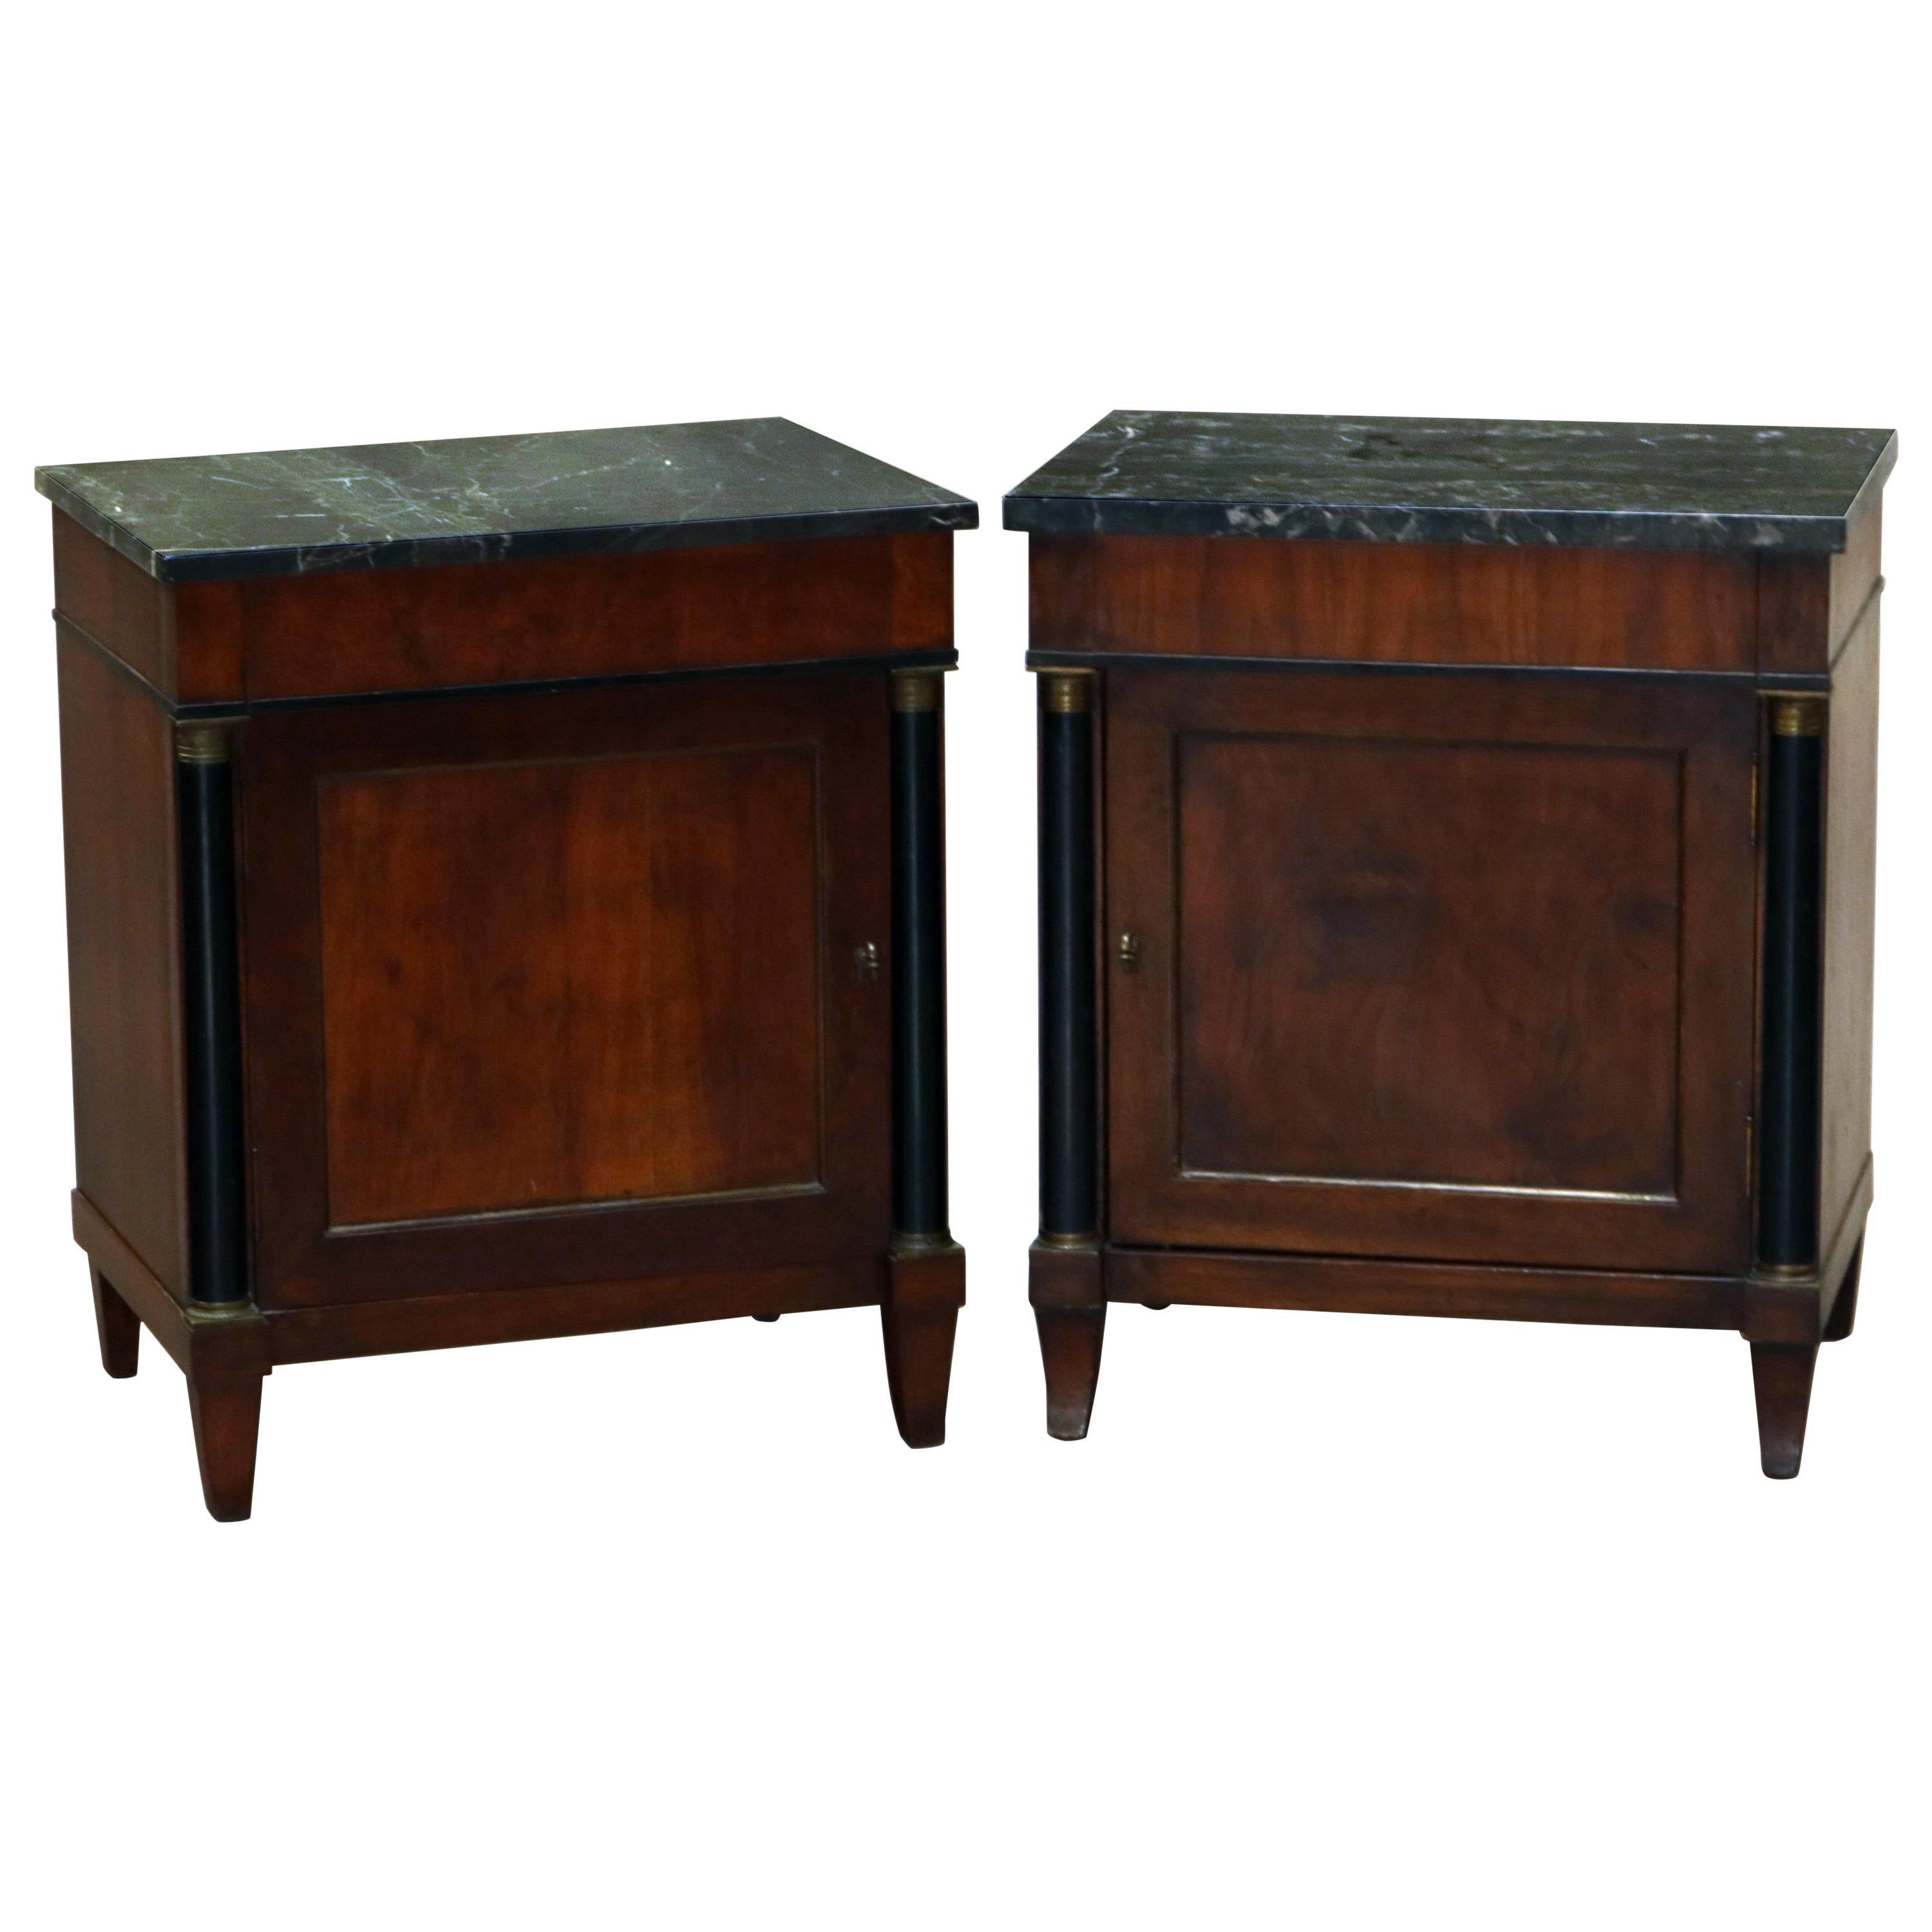 Pair of Antique French Empire Mahogany and Marble Side Tables, circa 1890